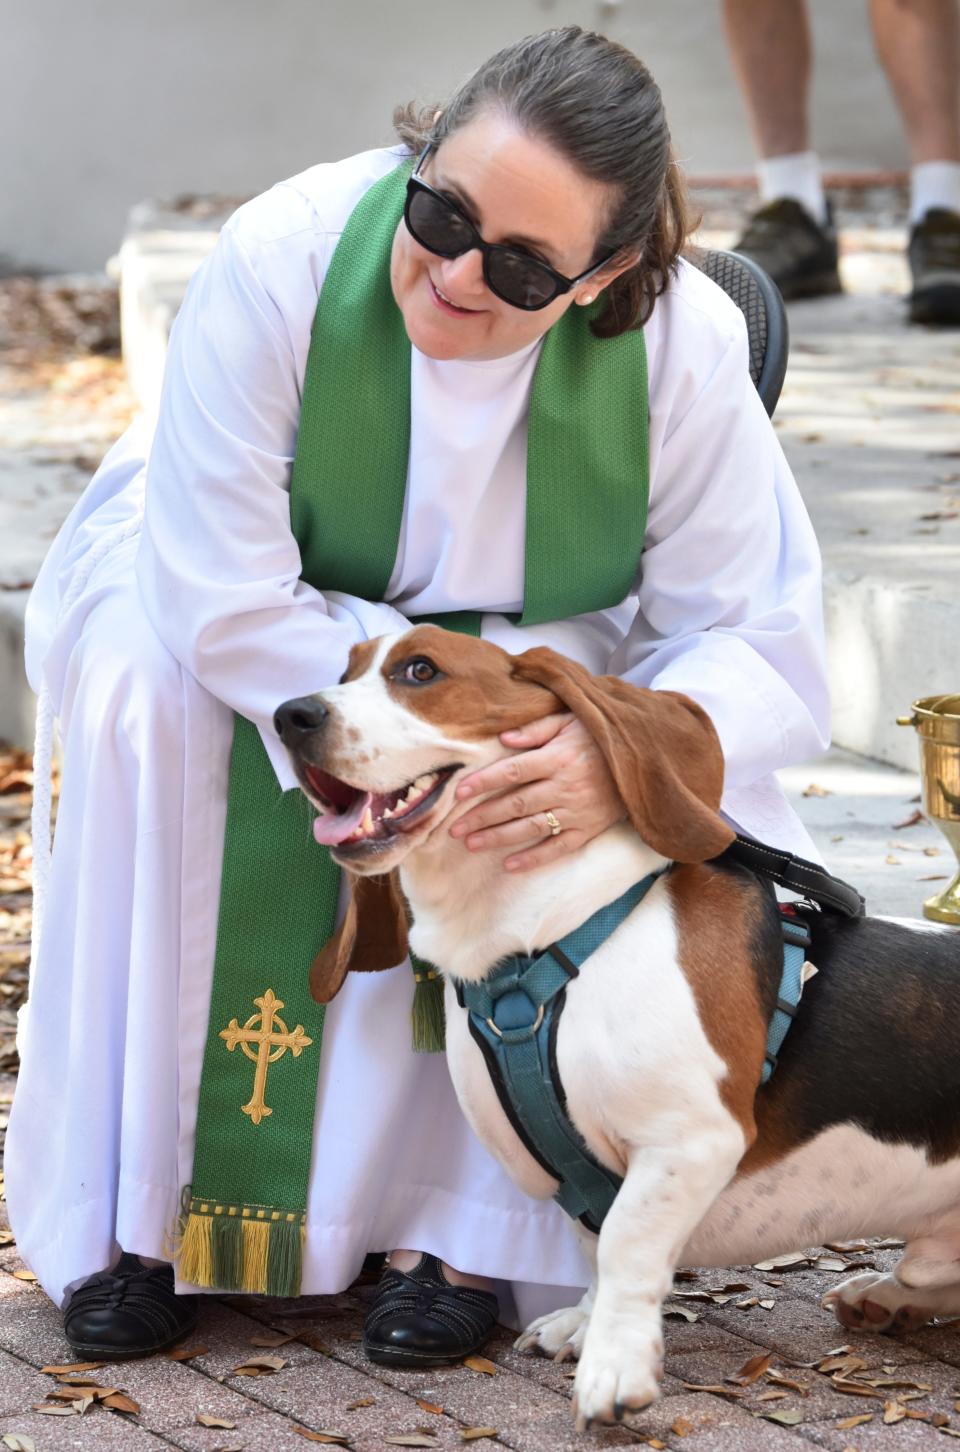 Reverend Sara Oxley officiates the annual Blessing of the Animals at the Myrt Tharpe Gazebo in Cocoa Village.